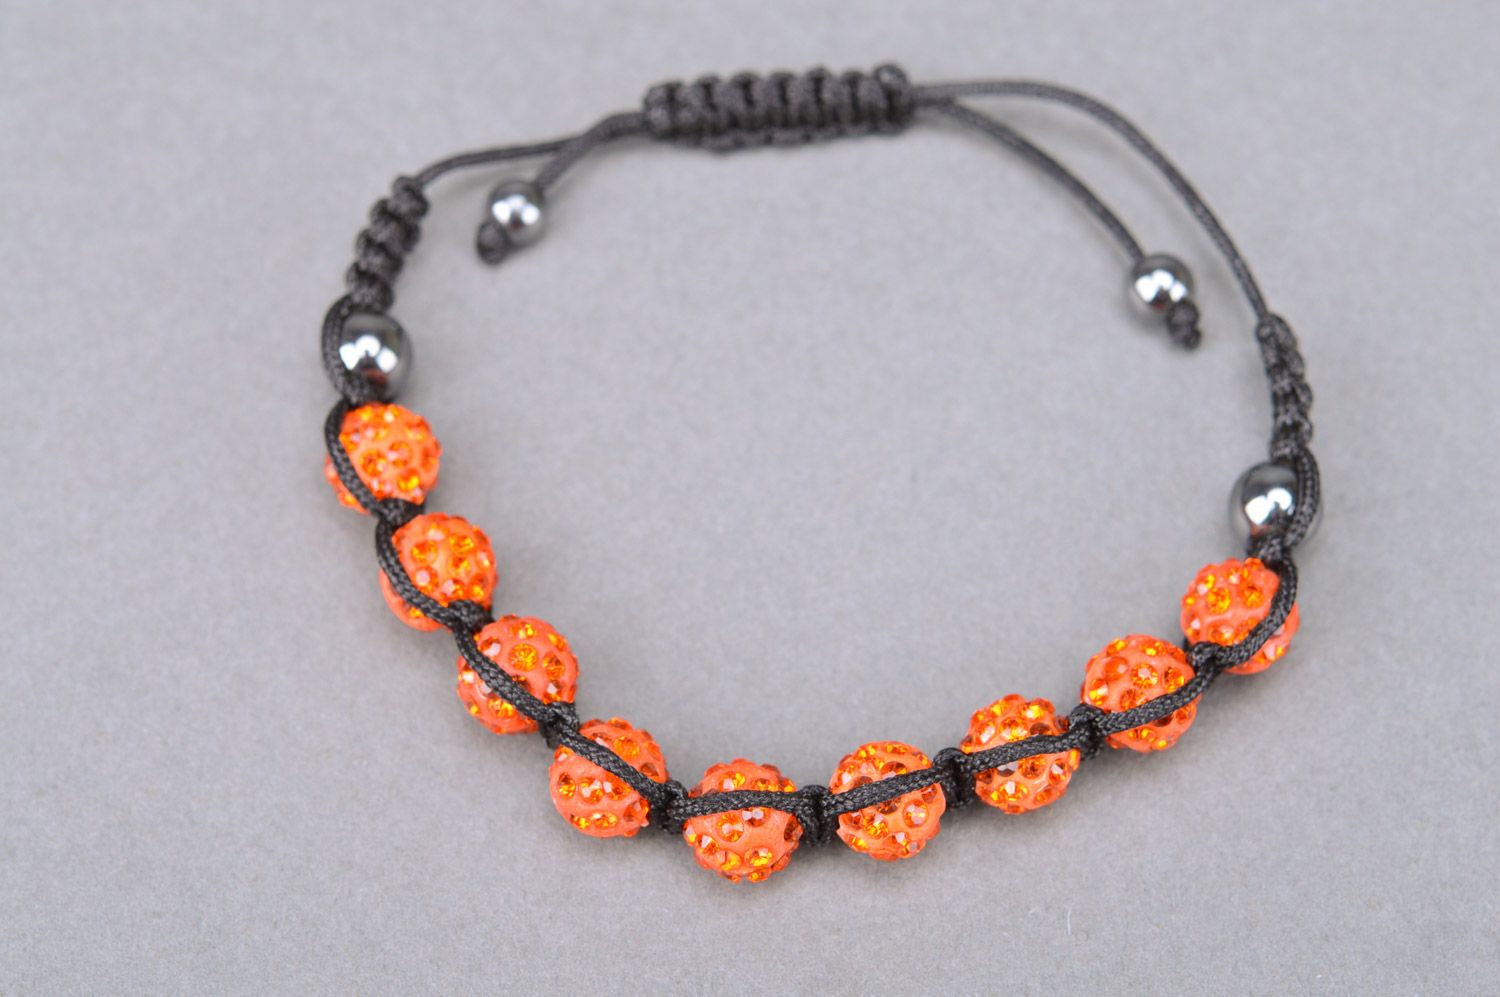 Bright orange handmade wrist bracelet woven of threads and beads with adjustable size photo 2